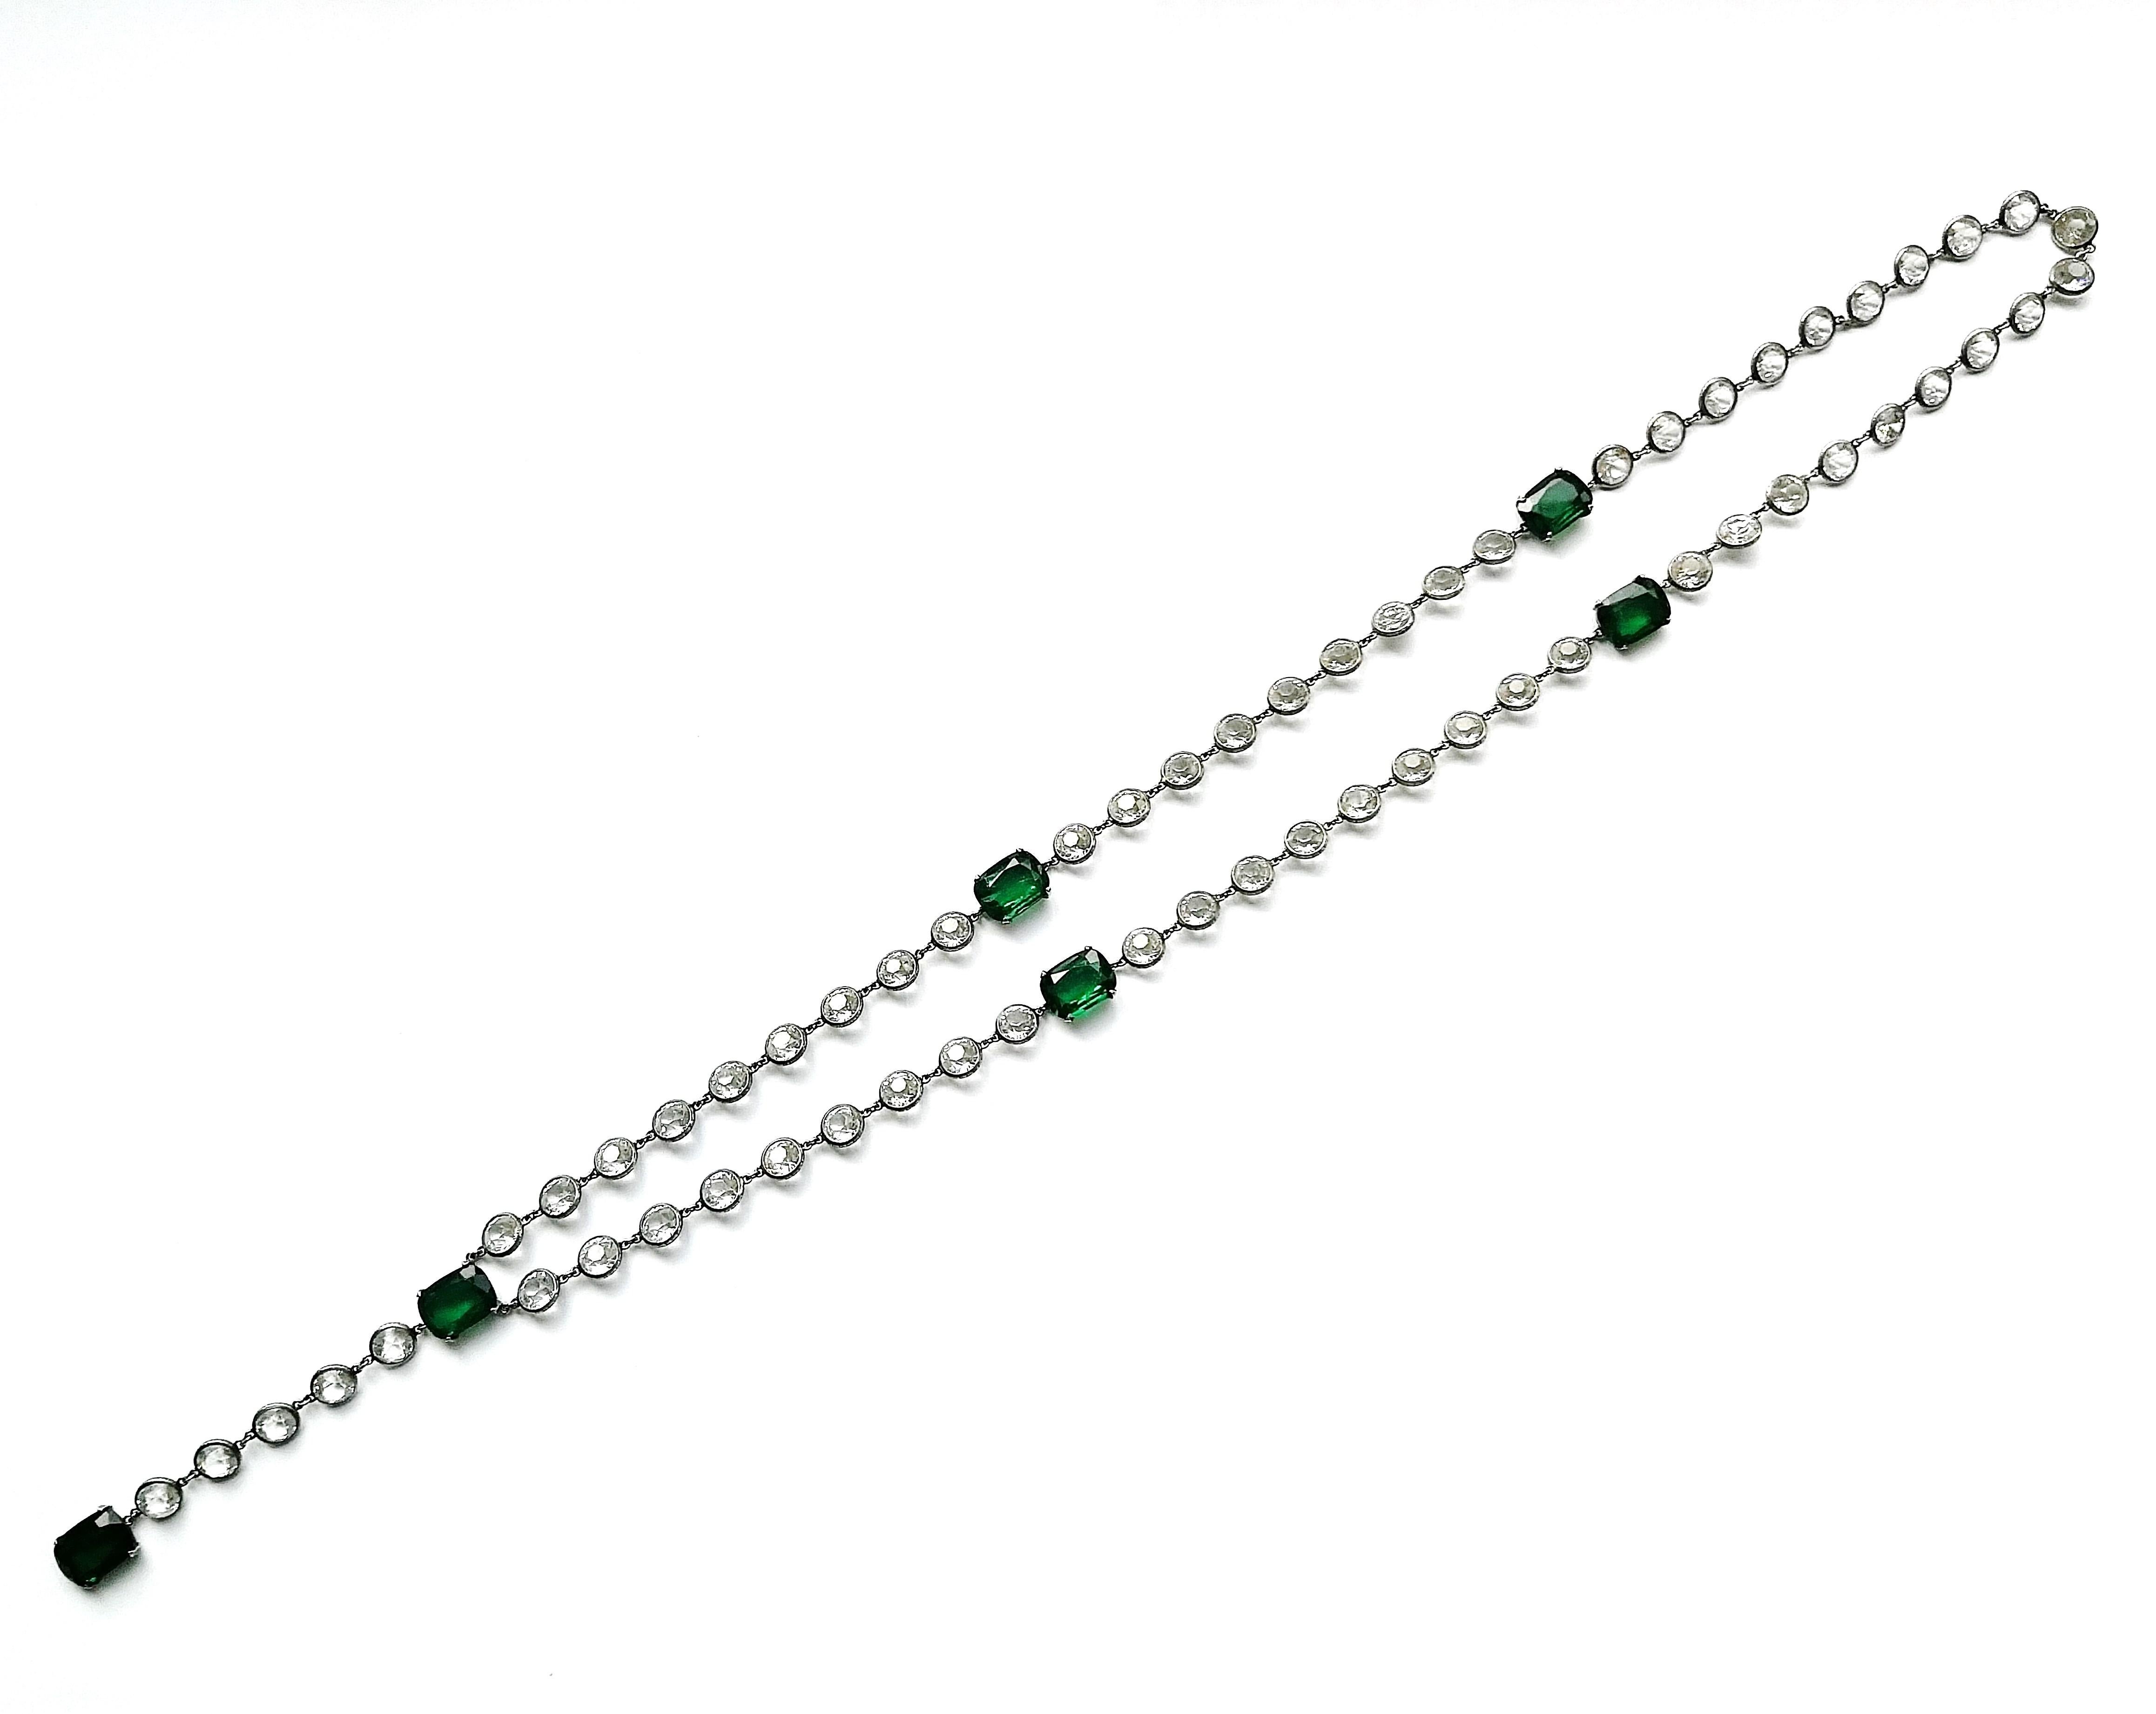 A beautiful quality and very long  'sautoir' necklace, in clear faceted crystals with emerald paste highlights. When set in silver, sautoirs of this style and quality are often attributed to Chanel, whose designs at this time would have had